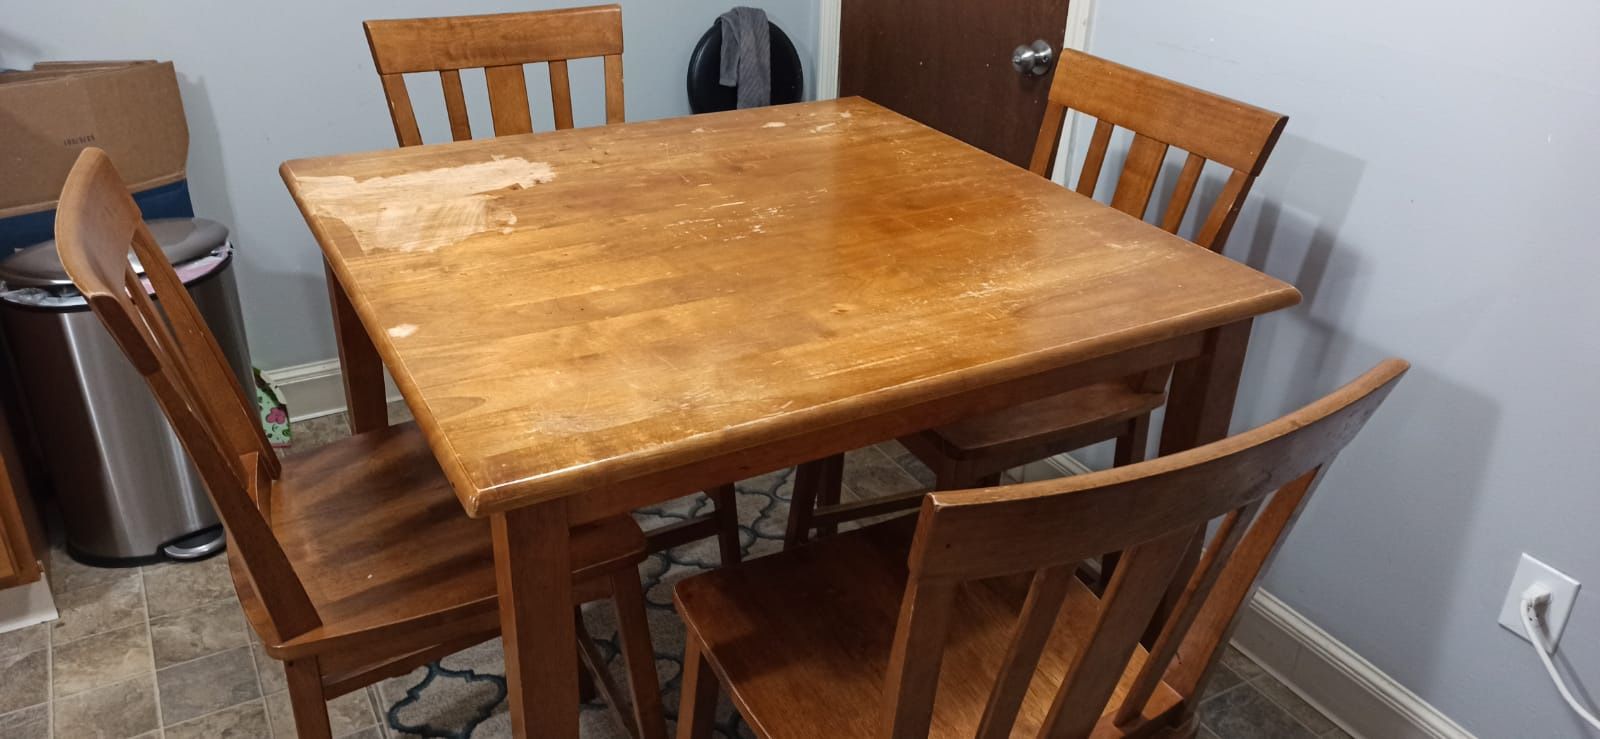 FREE !!! Wooden table with chairs.